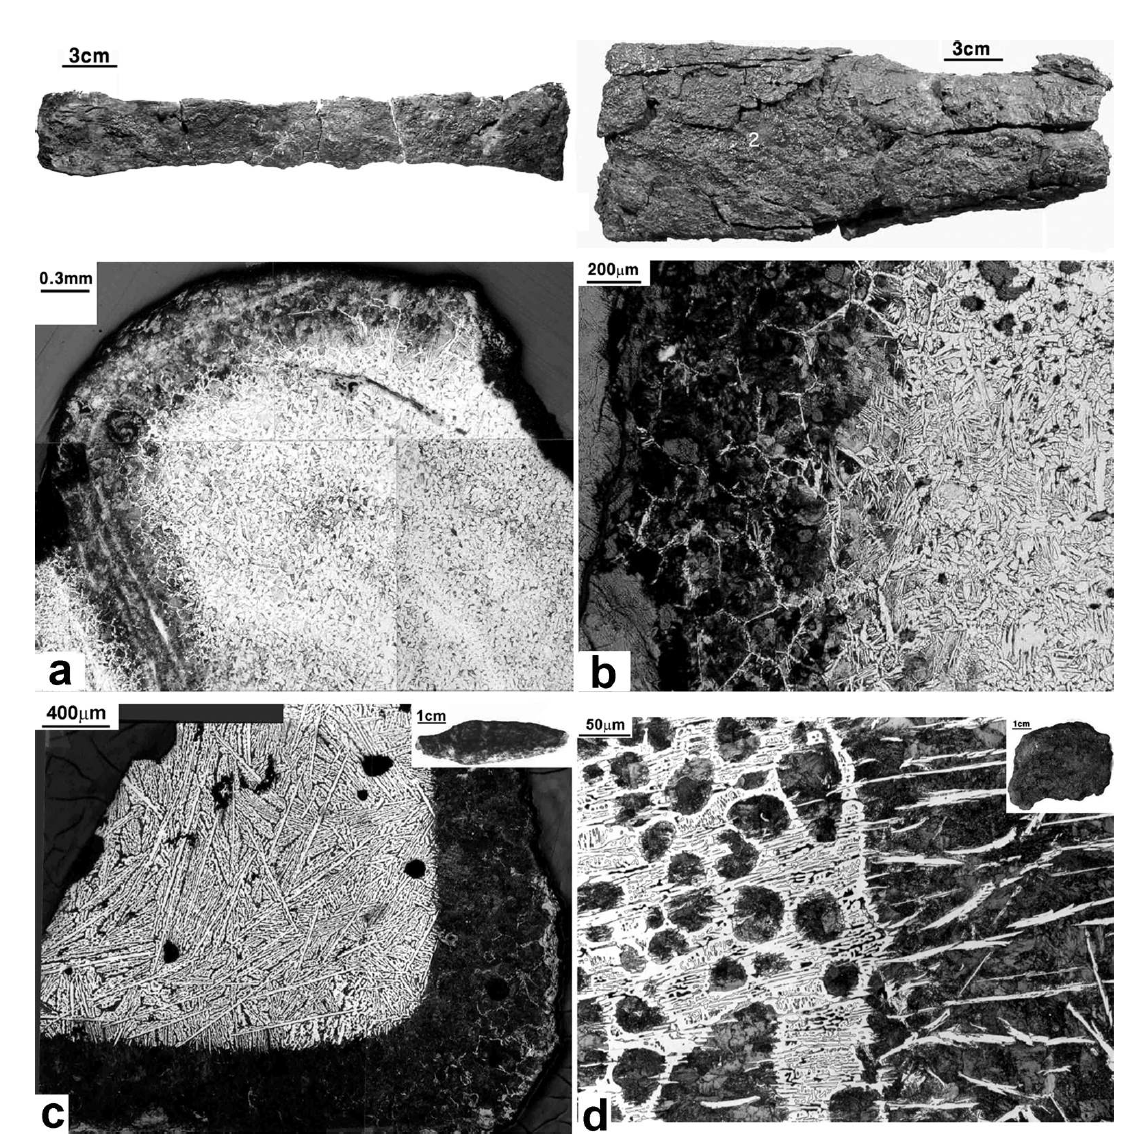 Iron objects and their microstructures providing clues for the estimation of steelmaking technology. (a) Iron object from a Unified Silla site at Gyongju and optical micrograph showing its structure; (b) iron axe from a Unified Silla site at Gyongju and optical micrograph showing its structure,(c) iron arrowhead from a Goguryo site in Manchuria and optical micrograph showing its structure); (d) anonymous iron object from a Baekje site at Sooncheon and optical micrograph showing its structure.